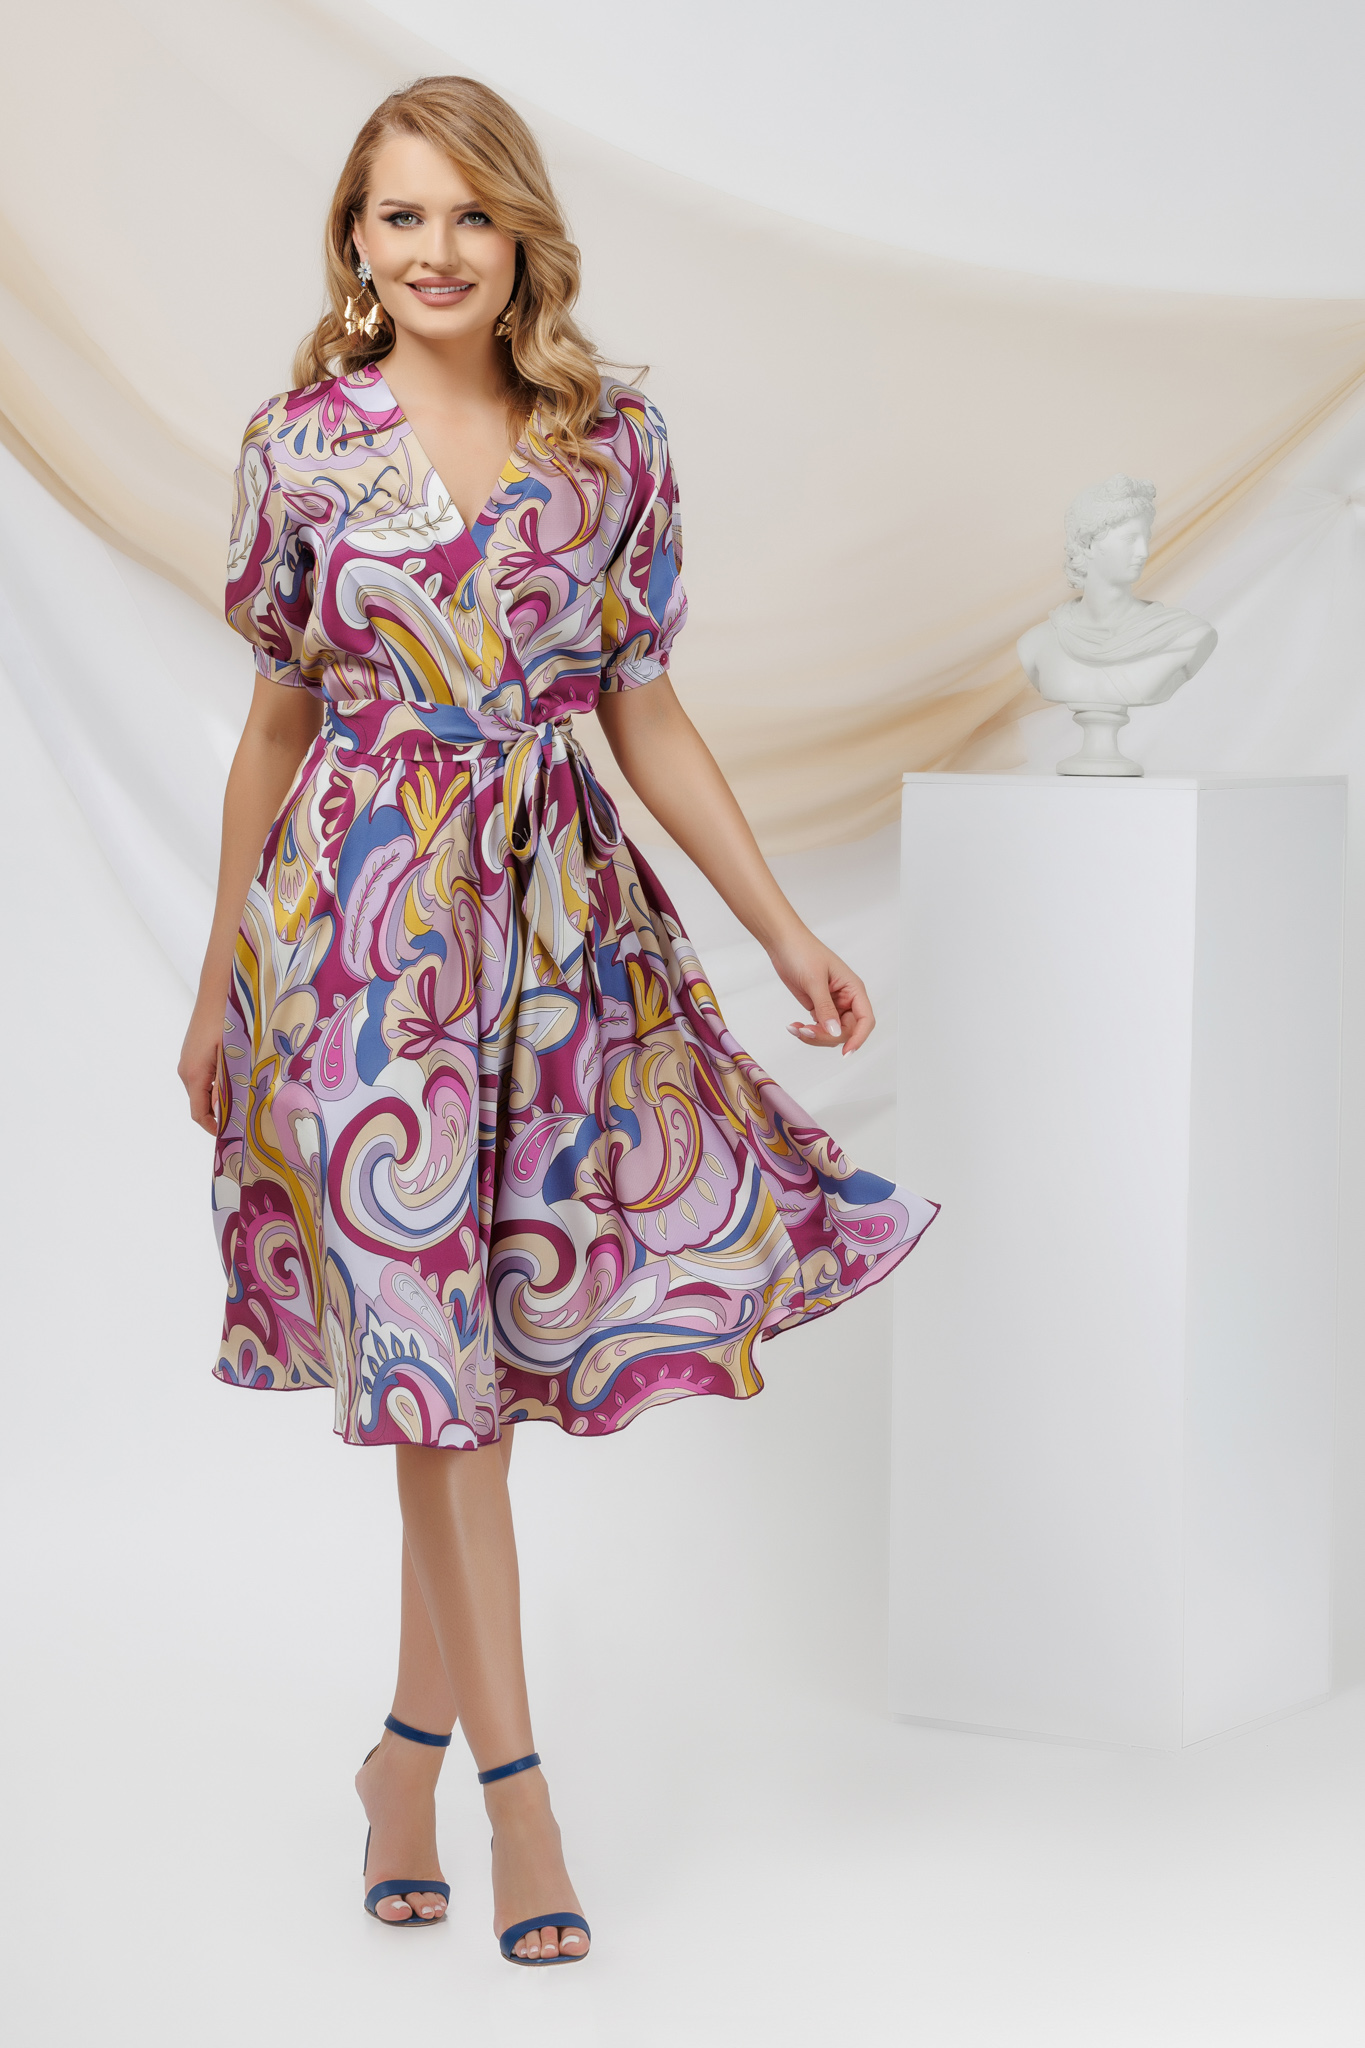 Dress from satin cloche with elastic waist with cut-out sleeves